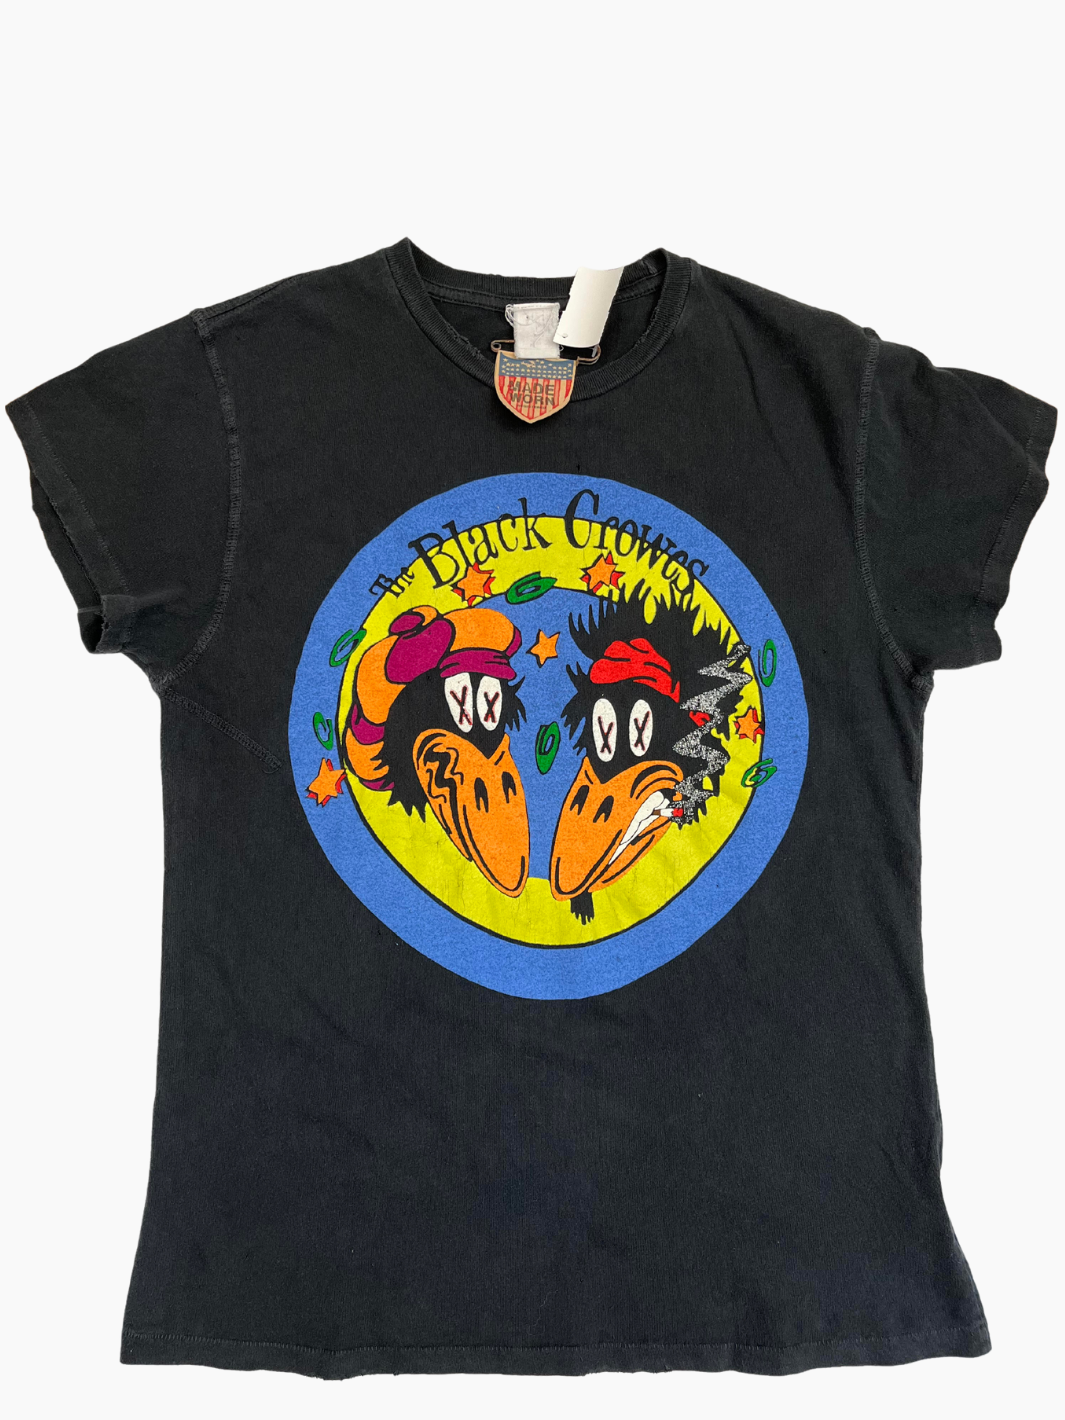 BLACK CROWES T-SHIRT IN COAL - Romi Boutique